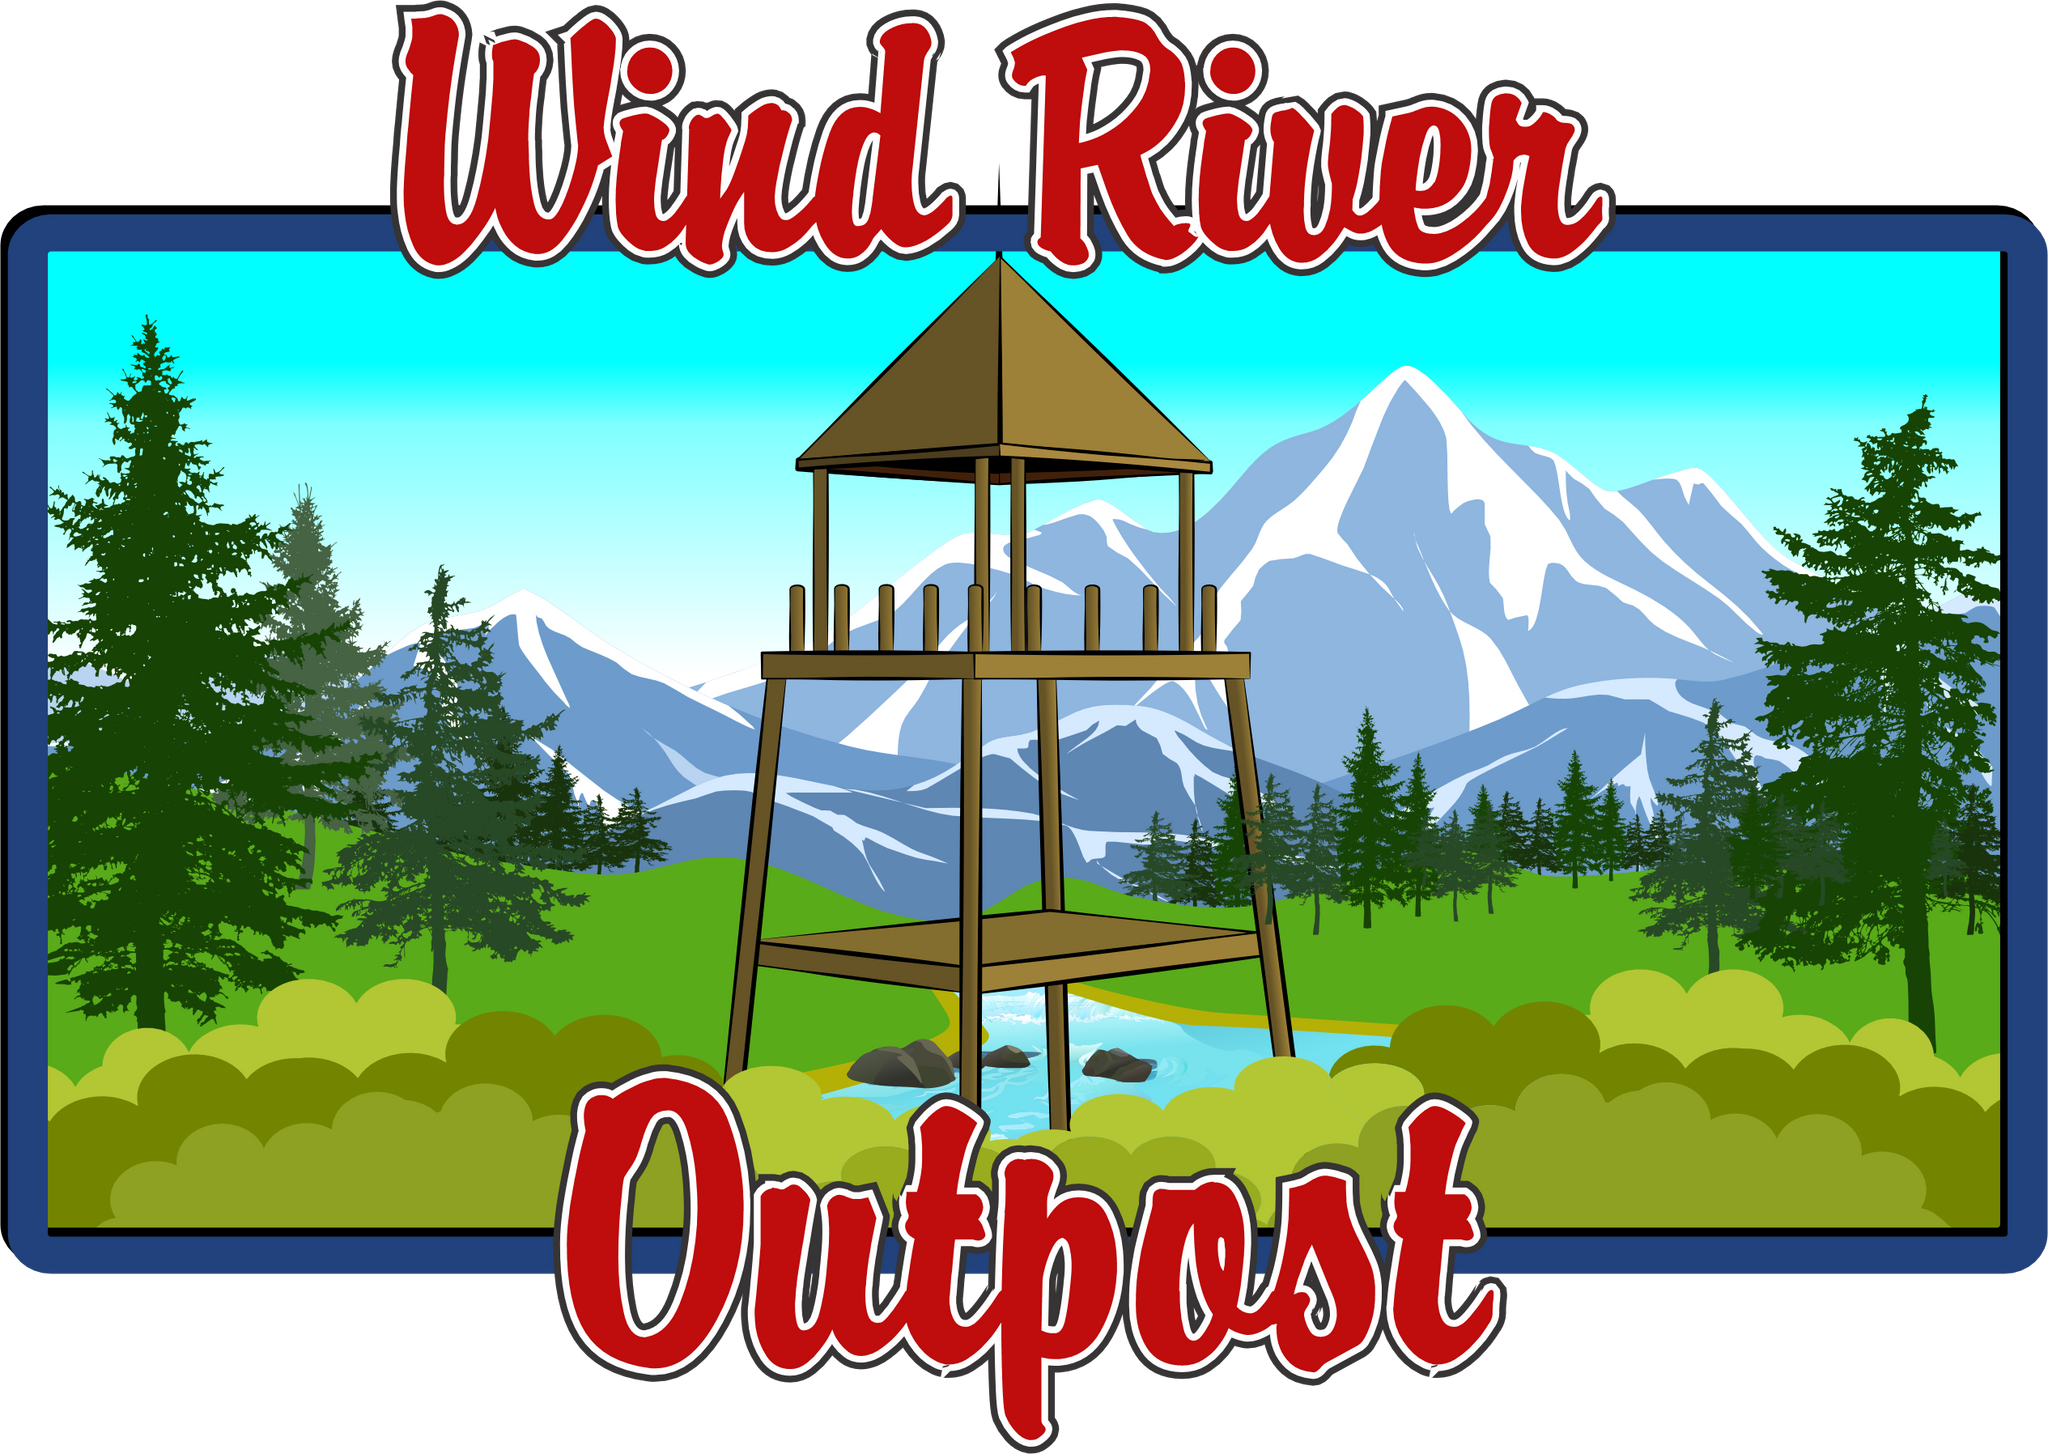 New Releases - Wind River Outpost